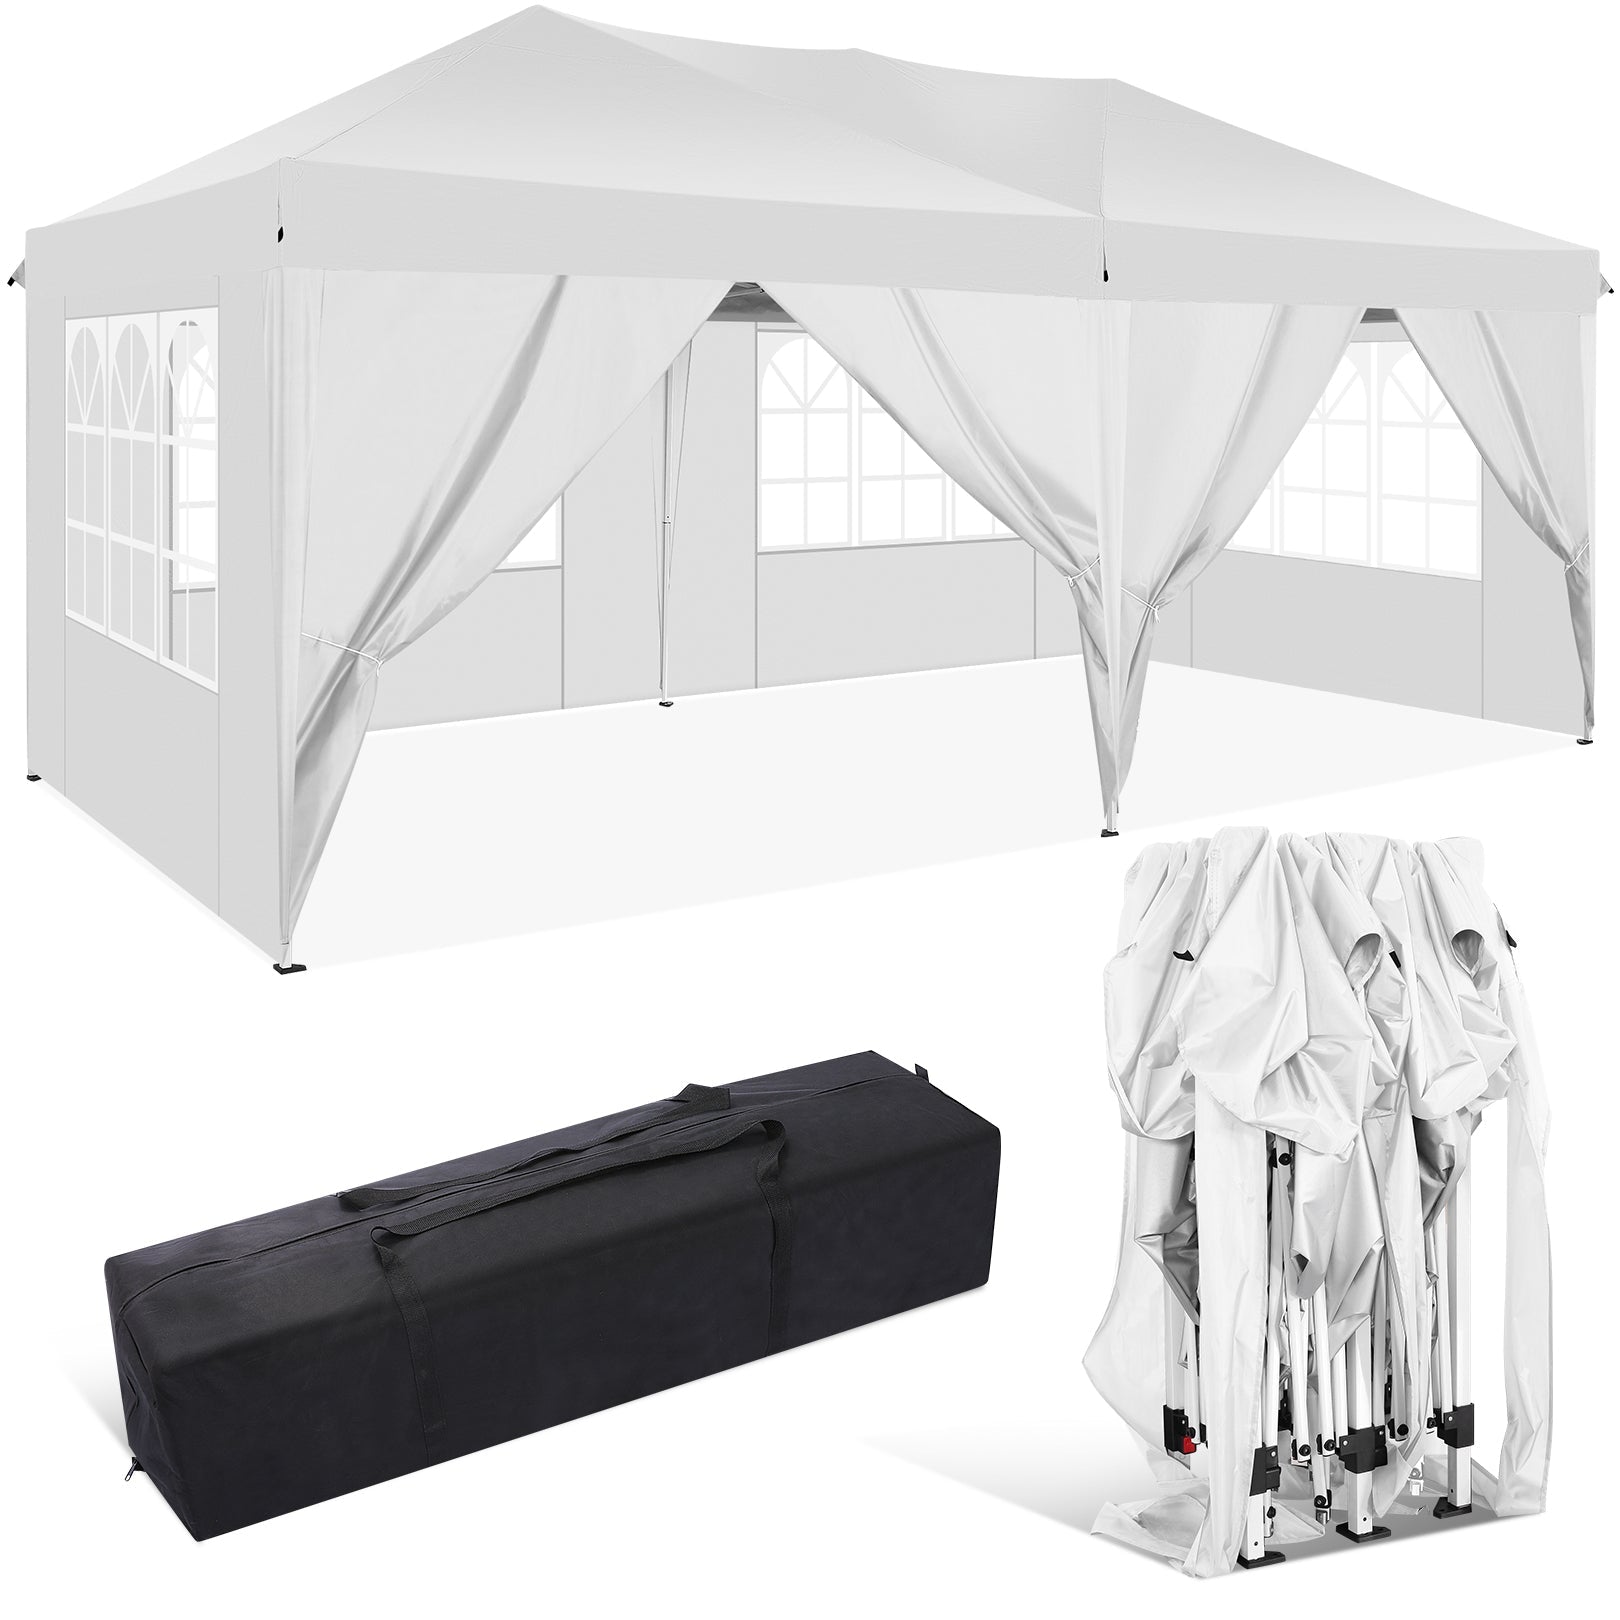 10' x 20' Outdoor Canopy Tent EZ Pop Up Backyard Canopy Portable Party Commercial Instant Canopy Shelter Tent Gazebo with 6 Removable Sidewalls & Carrying Bag for Wedding Picnics Camping, White